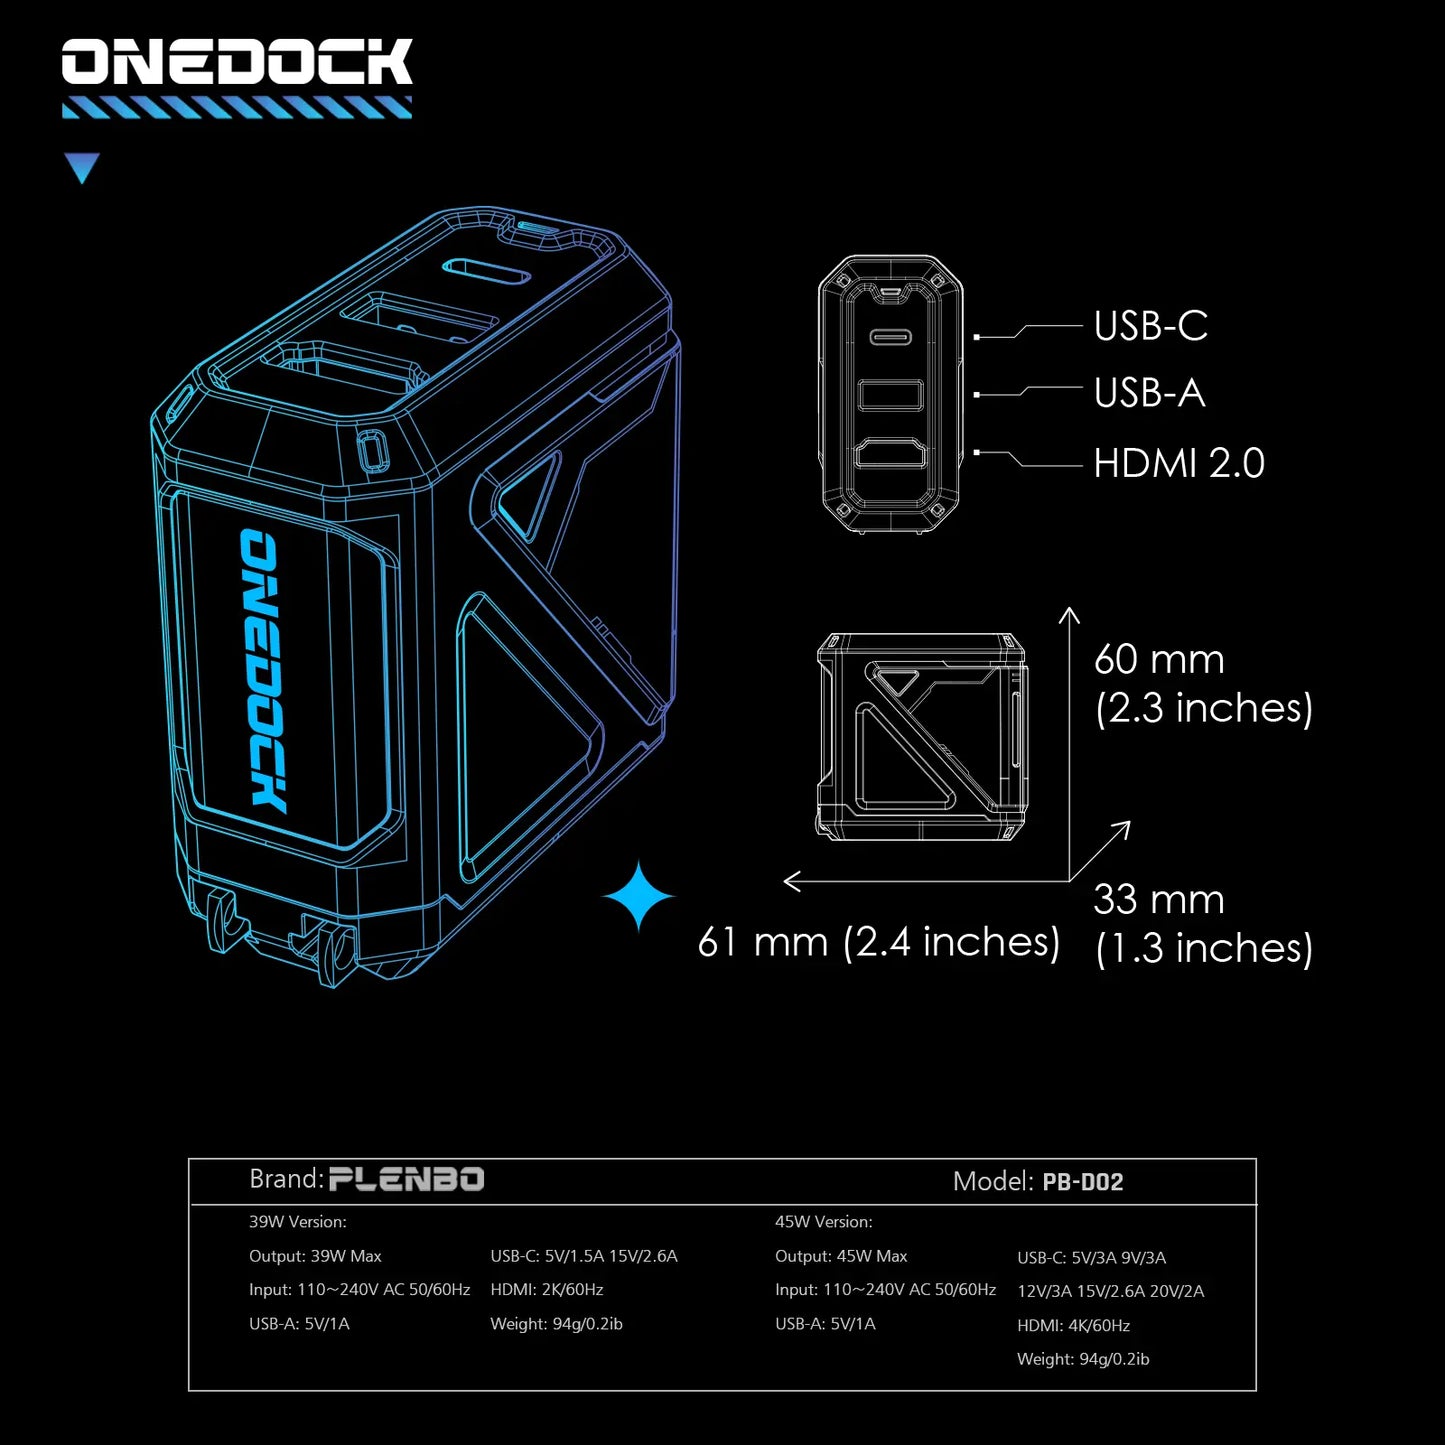 Specification of Onedock